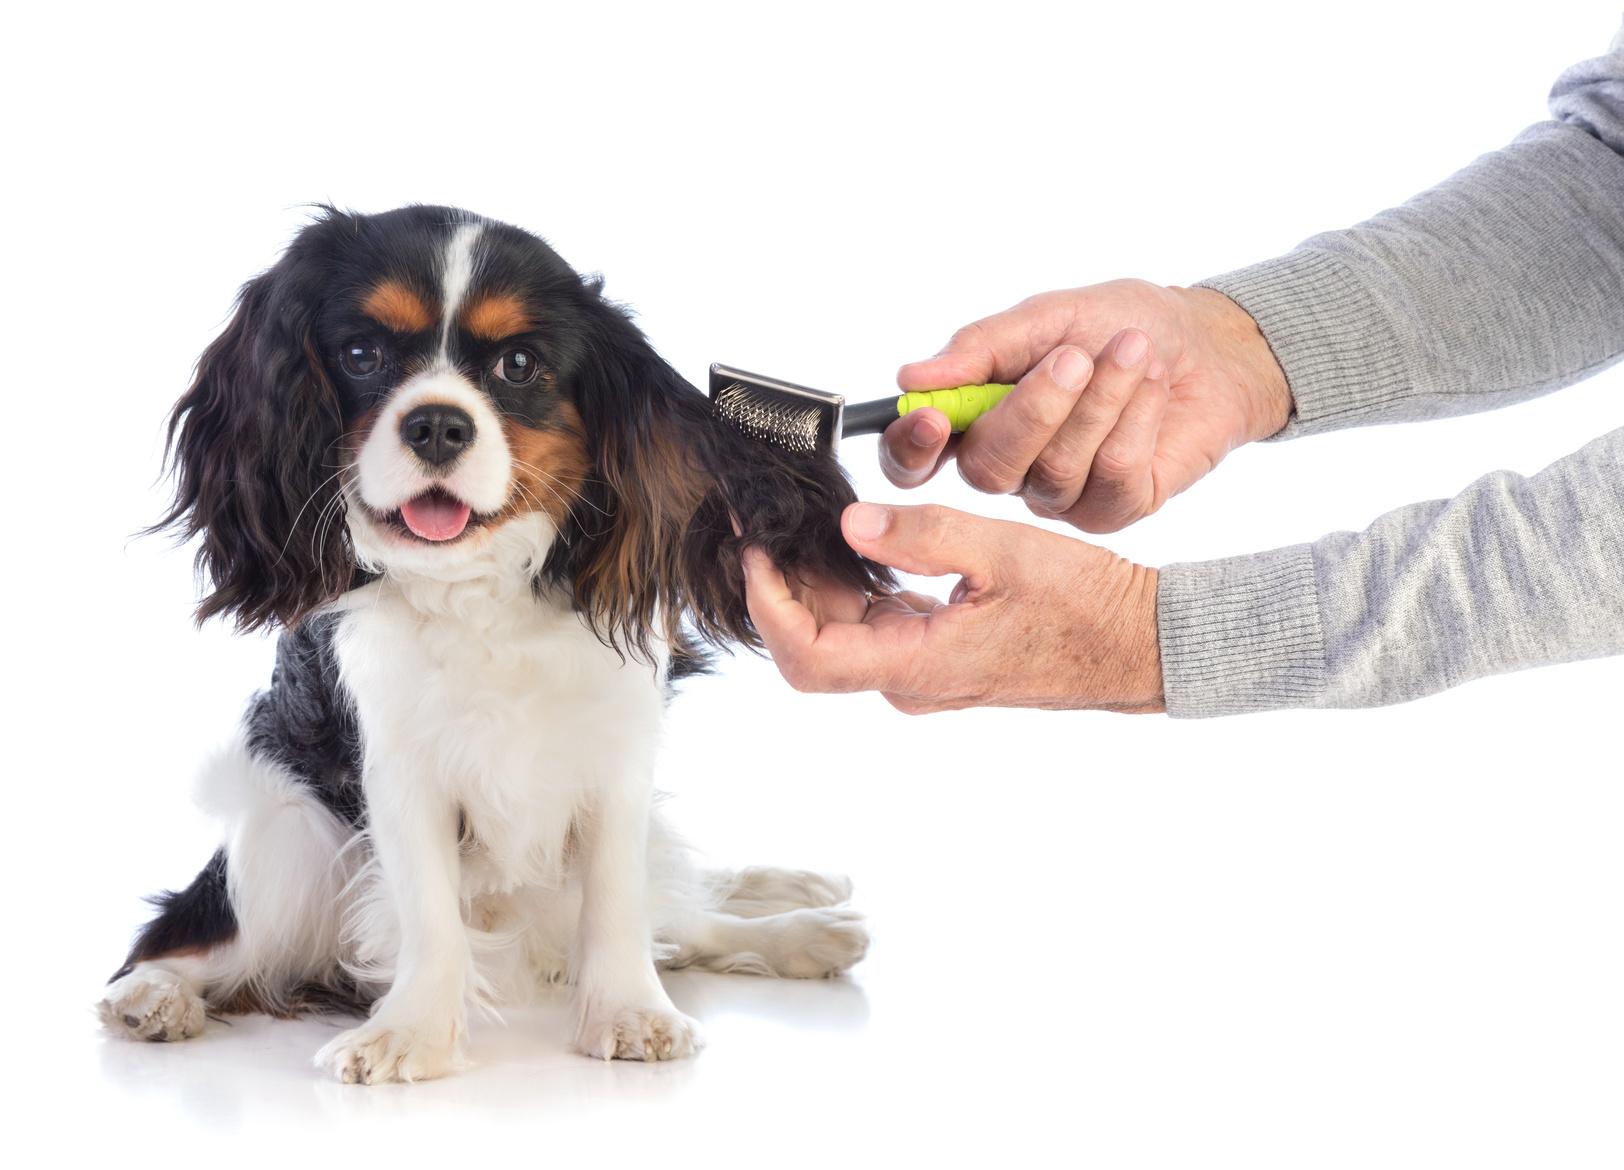 cavalier king charles grooming and care